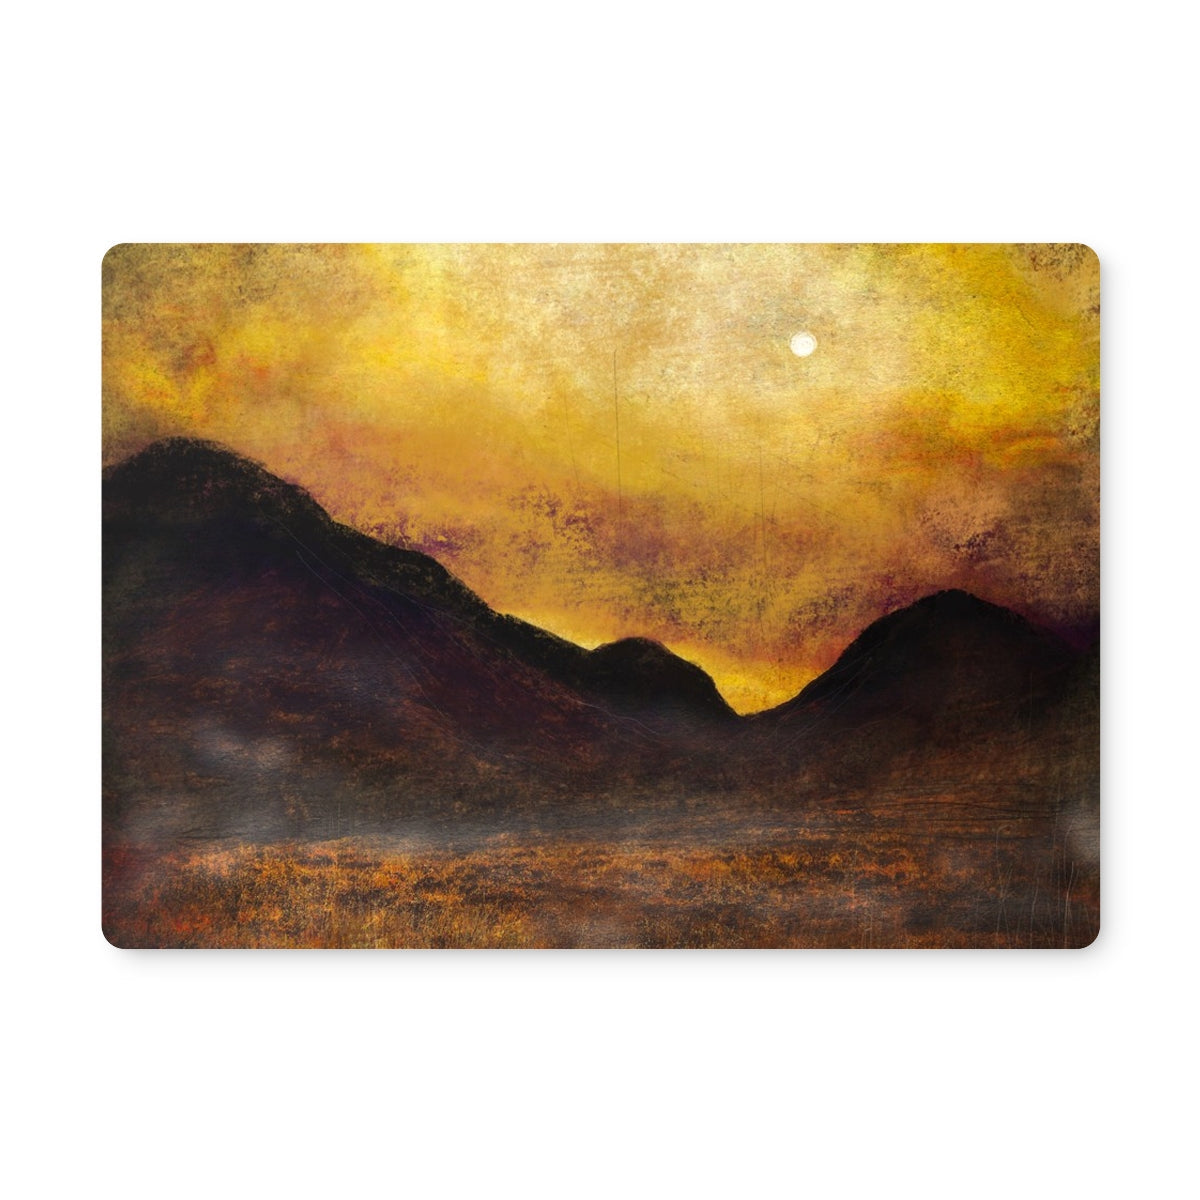 Glencoe Moonlight Art Gifts Placemat-Placemats-Glencoe Art Gallery-4 Placemats-Paintings, Prints, Homeware, Art Gifts From Scotland By Scottish Artist Kevin Hunter